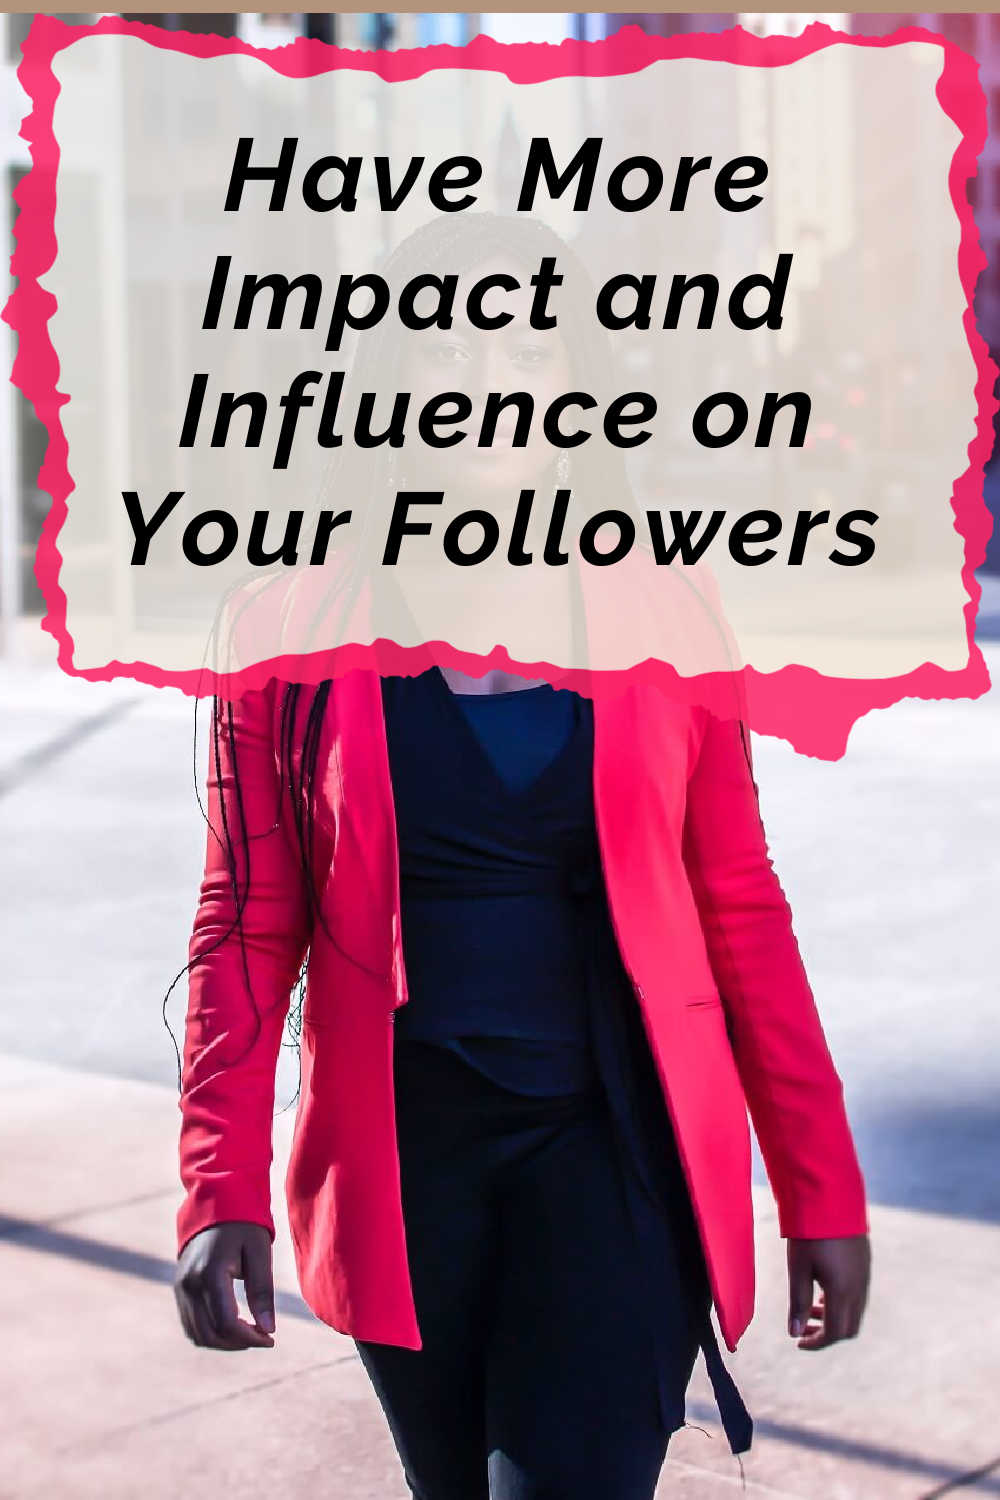 Have More Impact and Have More Influence on Your Followers